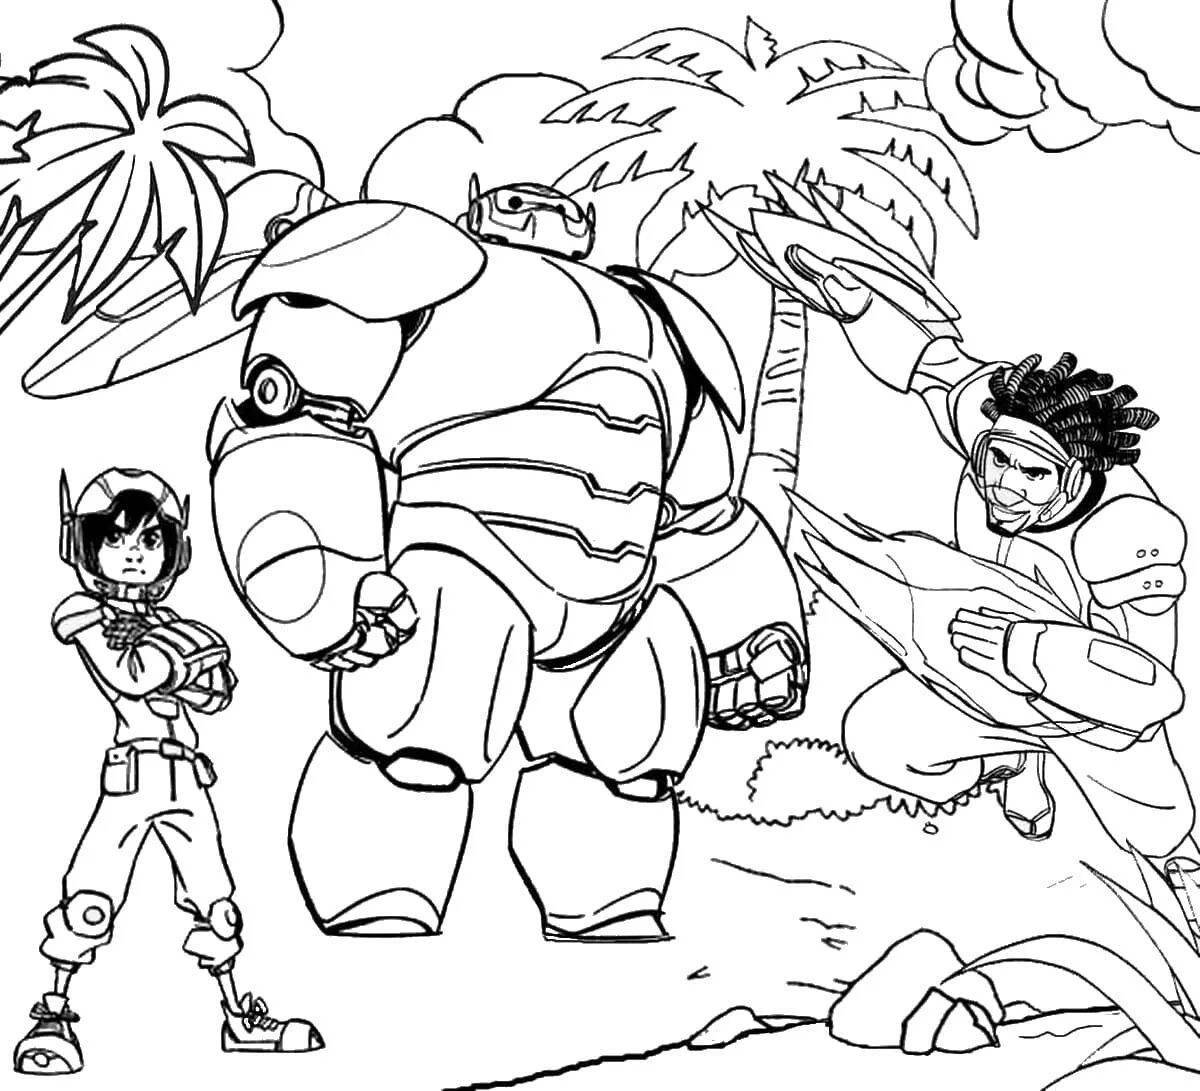 Amazing hero coloring page